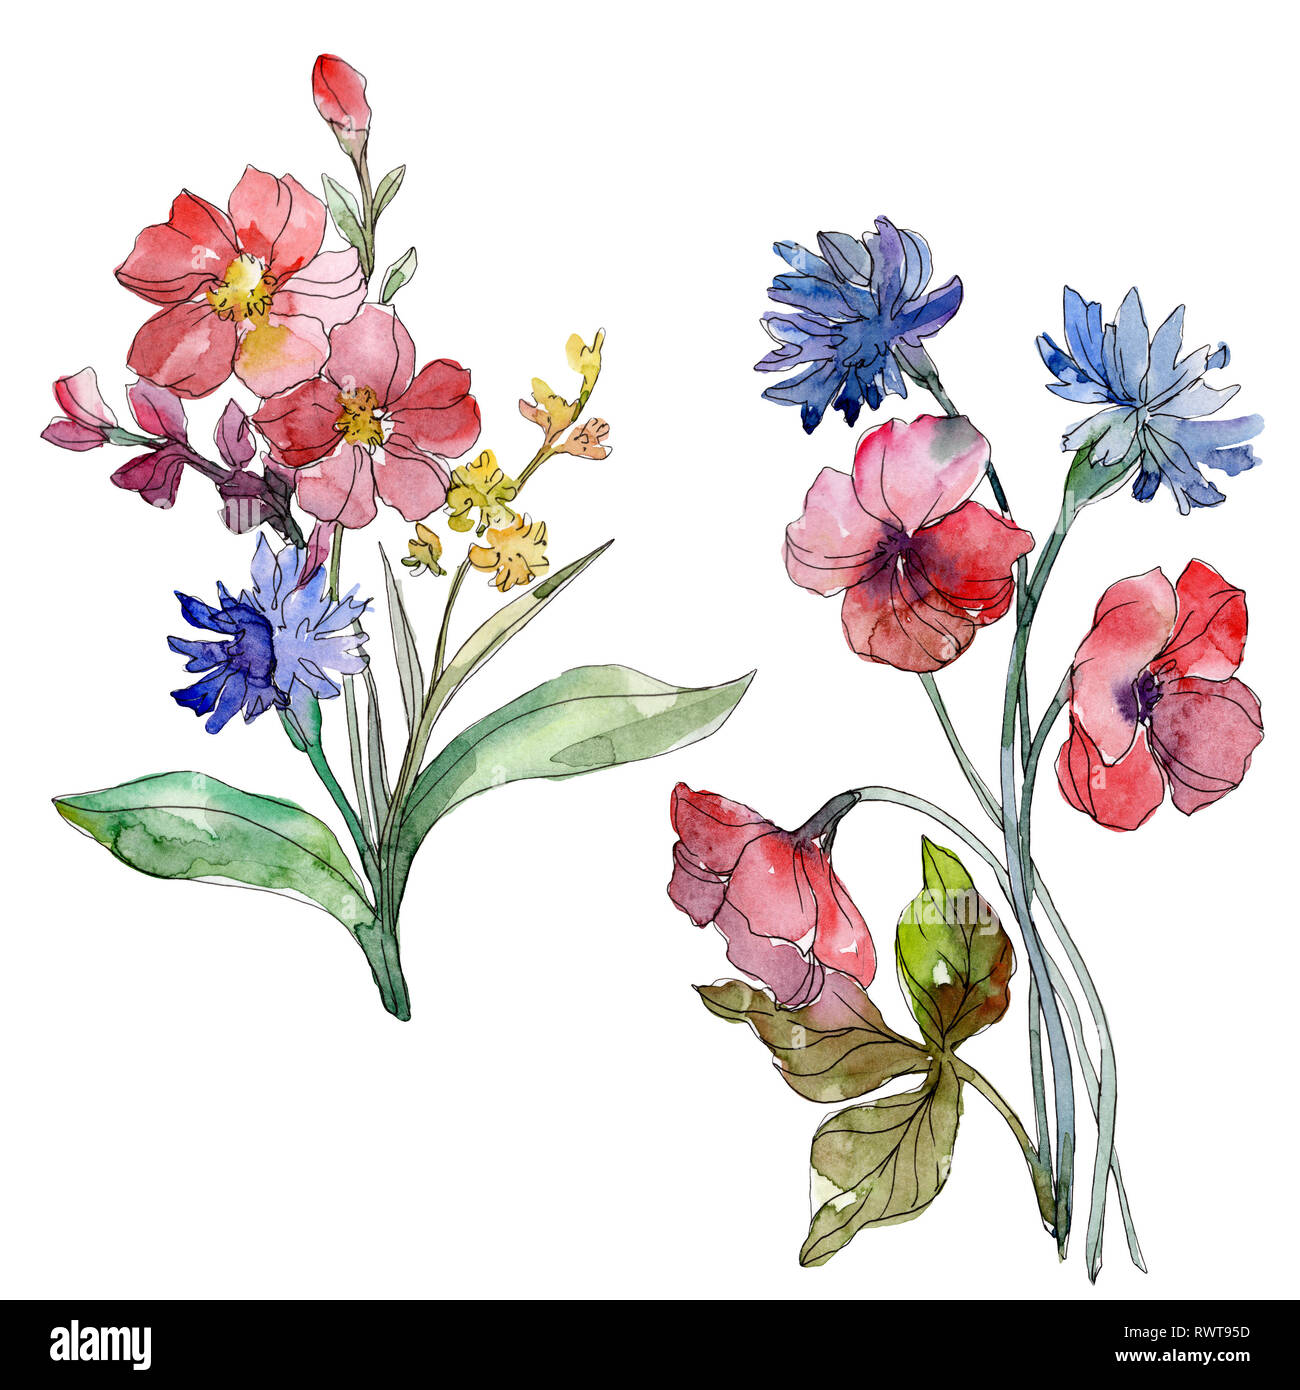 Wildflower bouquet floral botanical flowers. Watercolor background set. Isolated wildflowers illustration element. Stock Photo